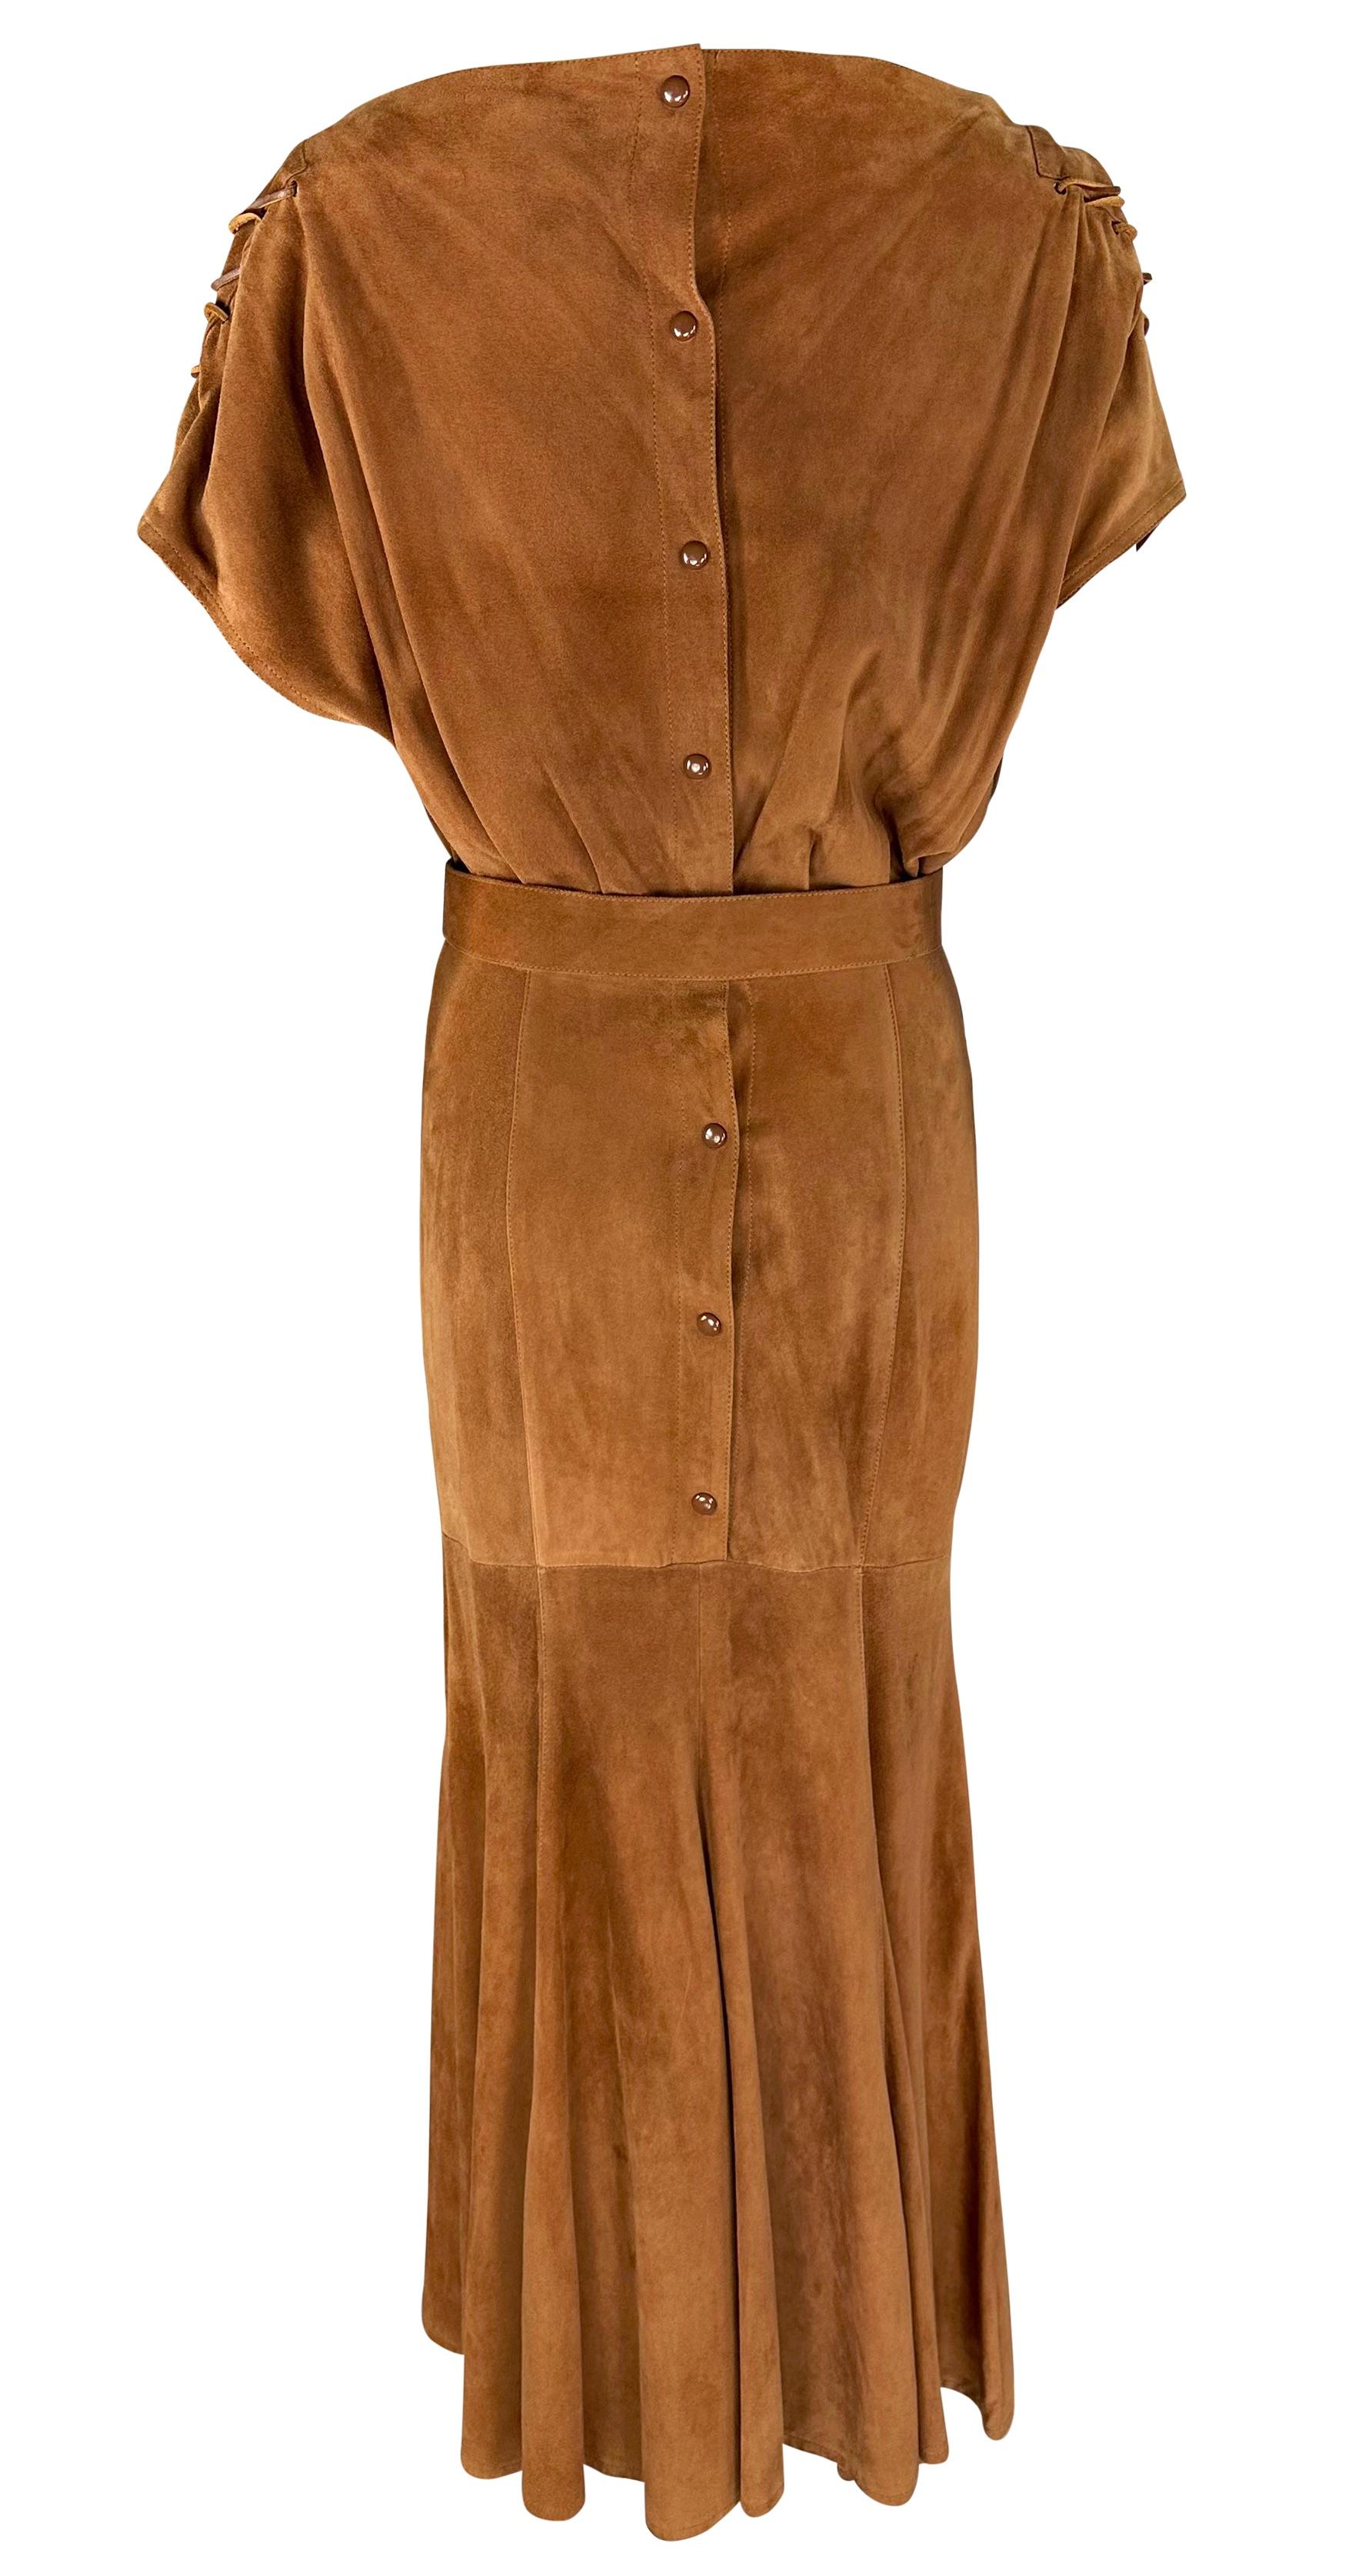 Thierry Mugler Anfang der 1980er Jahre Brown Suede Belted Lace-Up Flare Leather Maxi Dress Damen im Angebot